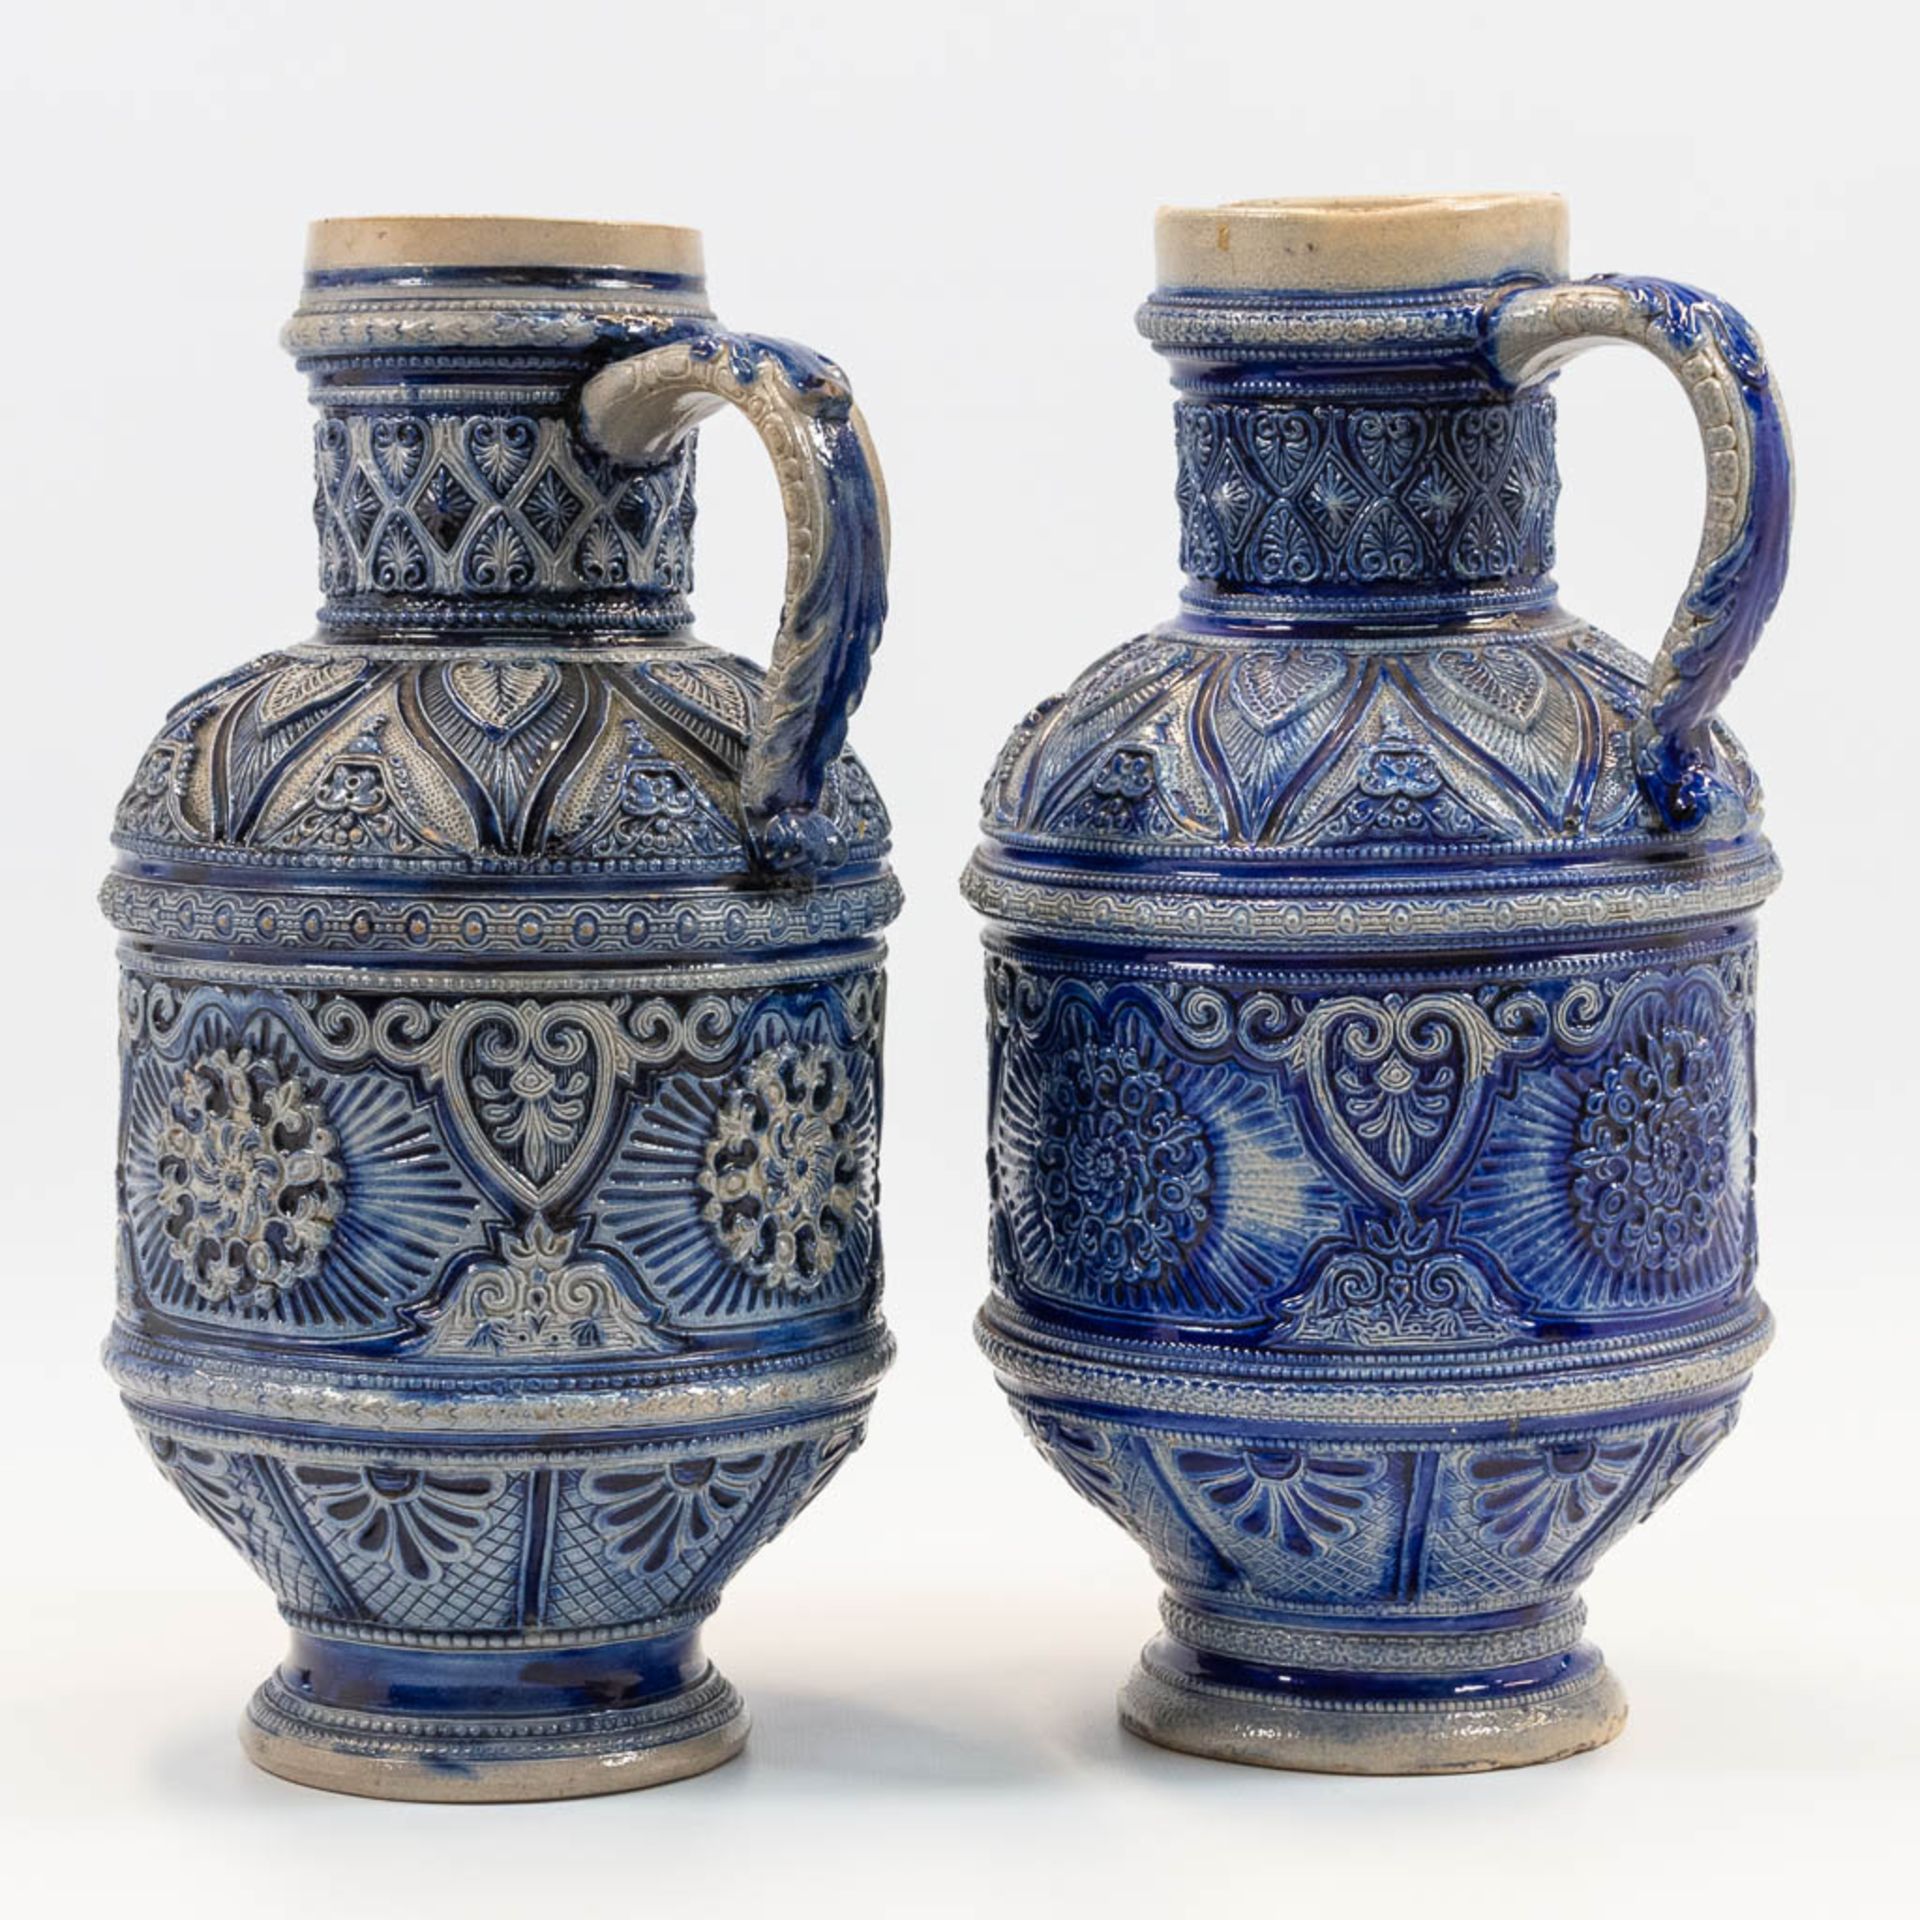 A collection of 2 Westerwald Pitchers with blue glaze, of which one has a Bartmann. (32 x 18 cm) - Image 10 of 14